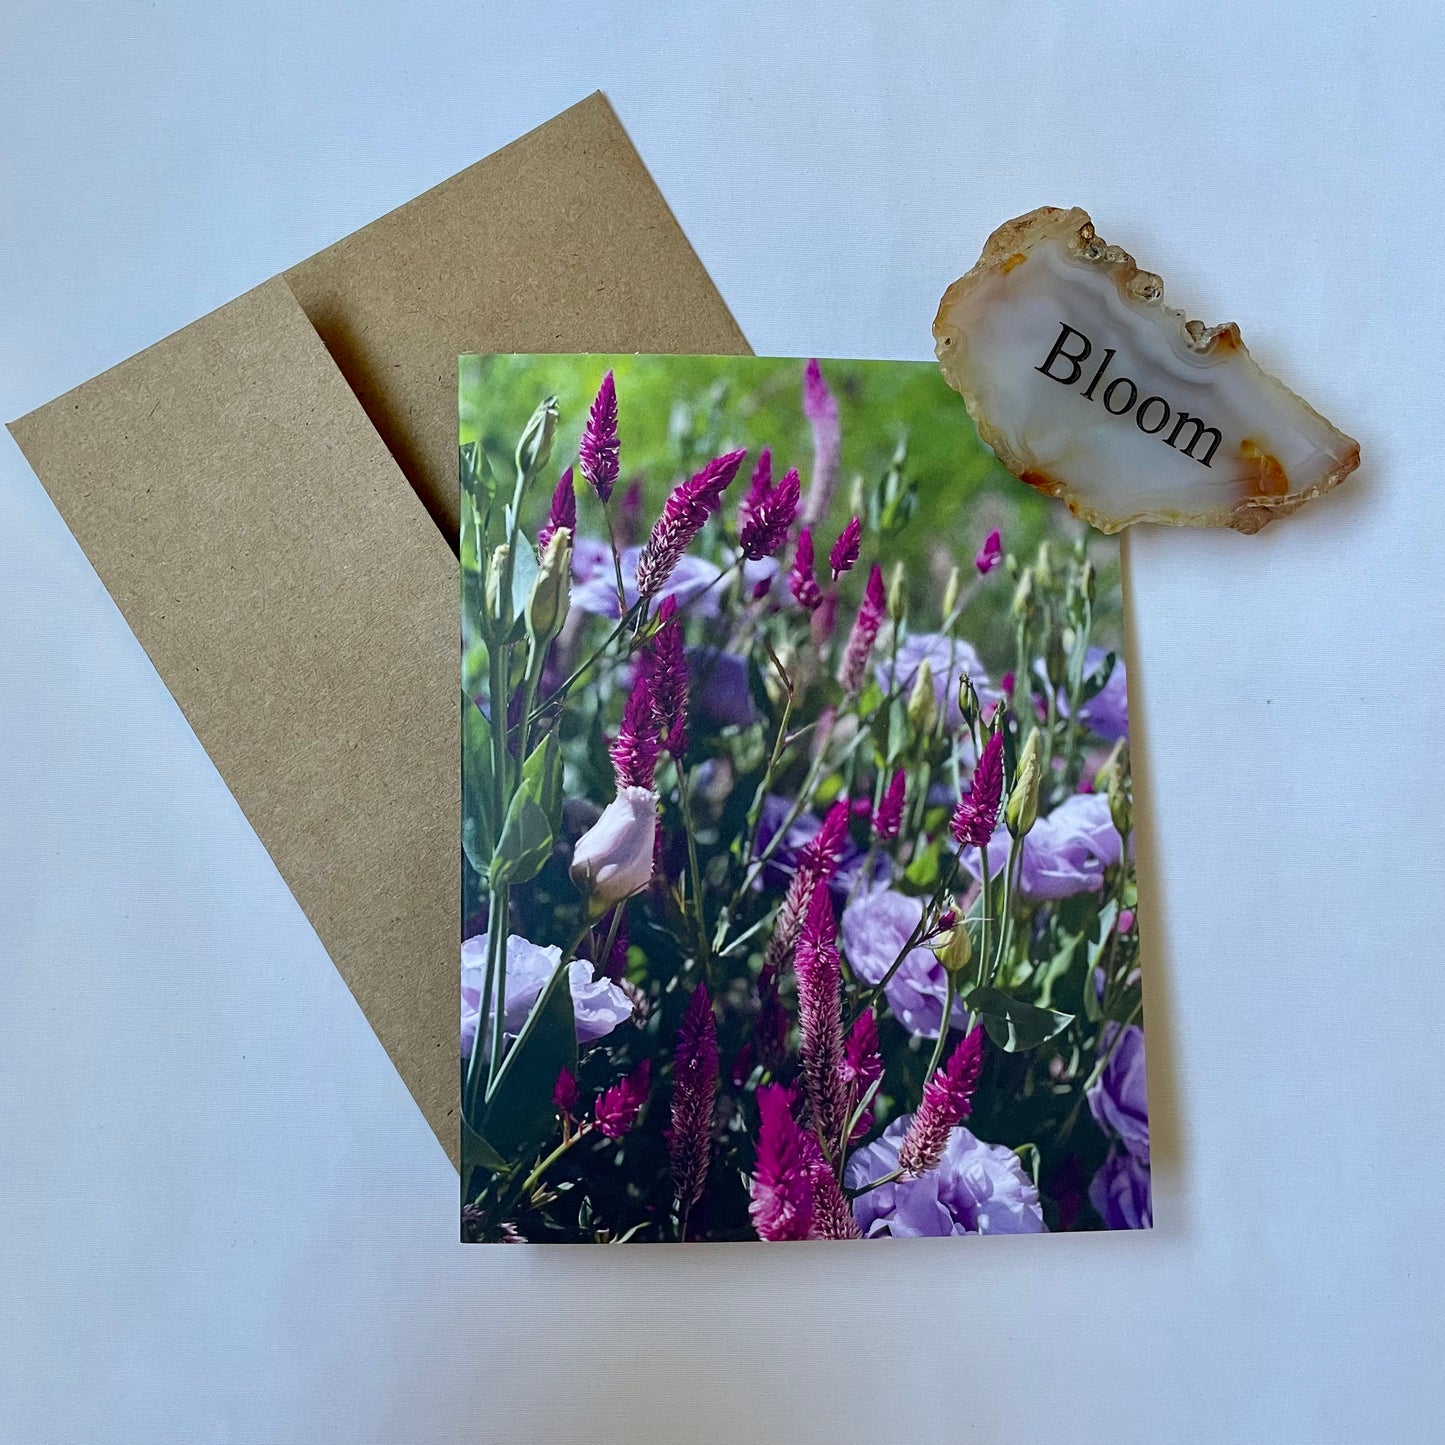 Fall Delight Original Nature Photography Greeting Card Boxed Set of 5 with Kraft Envelopes